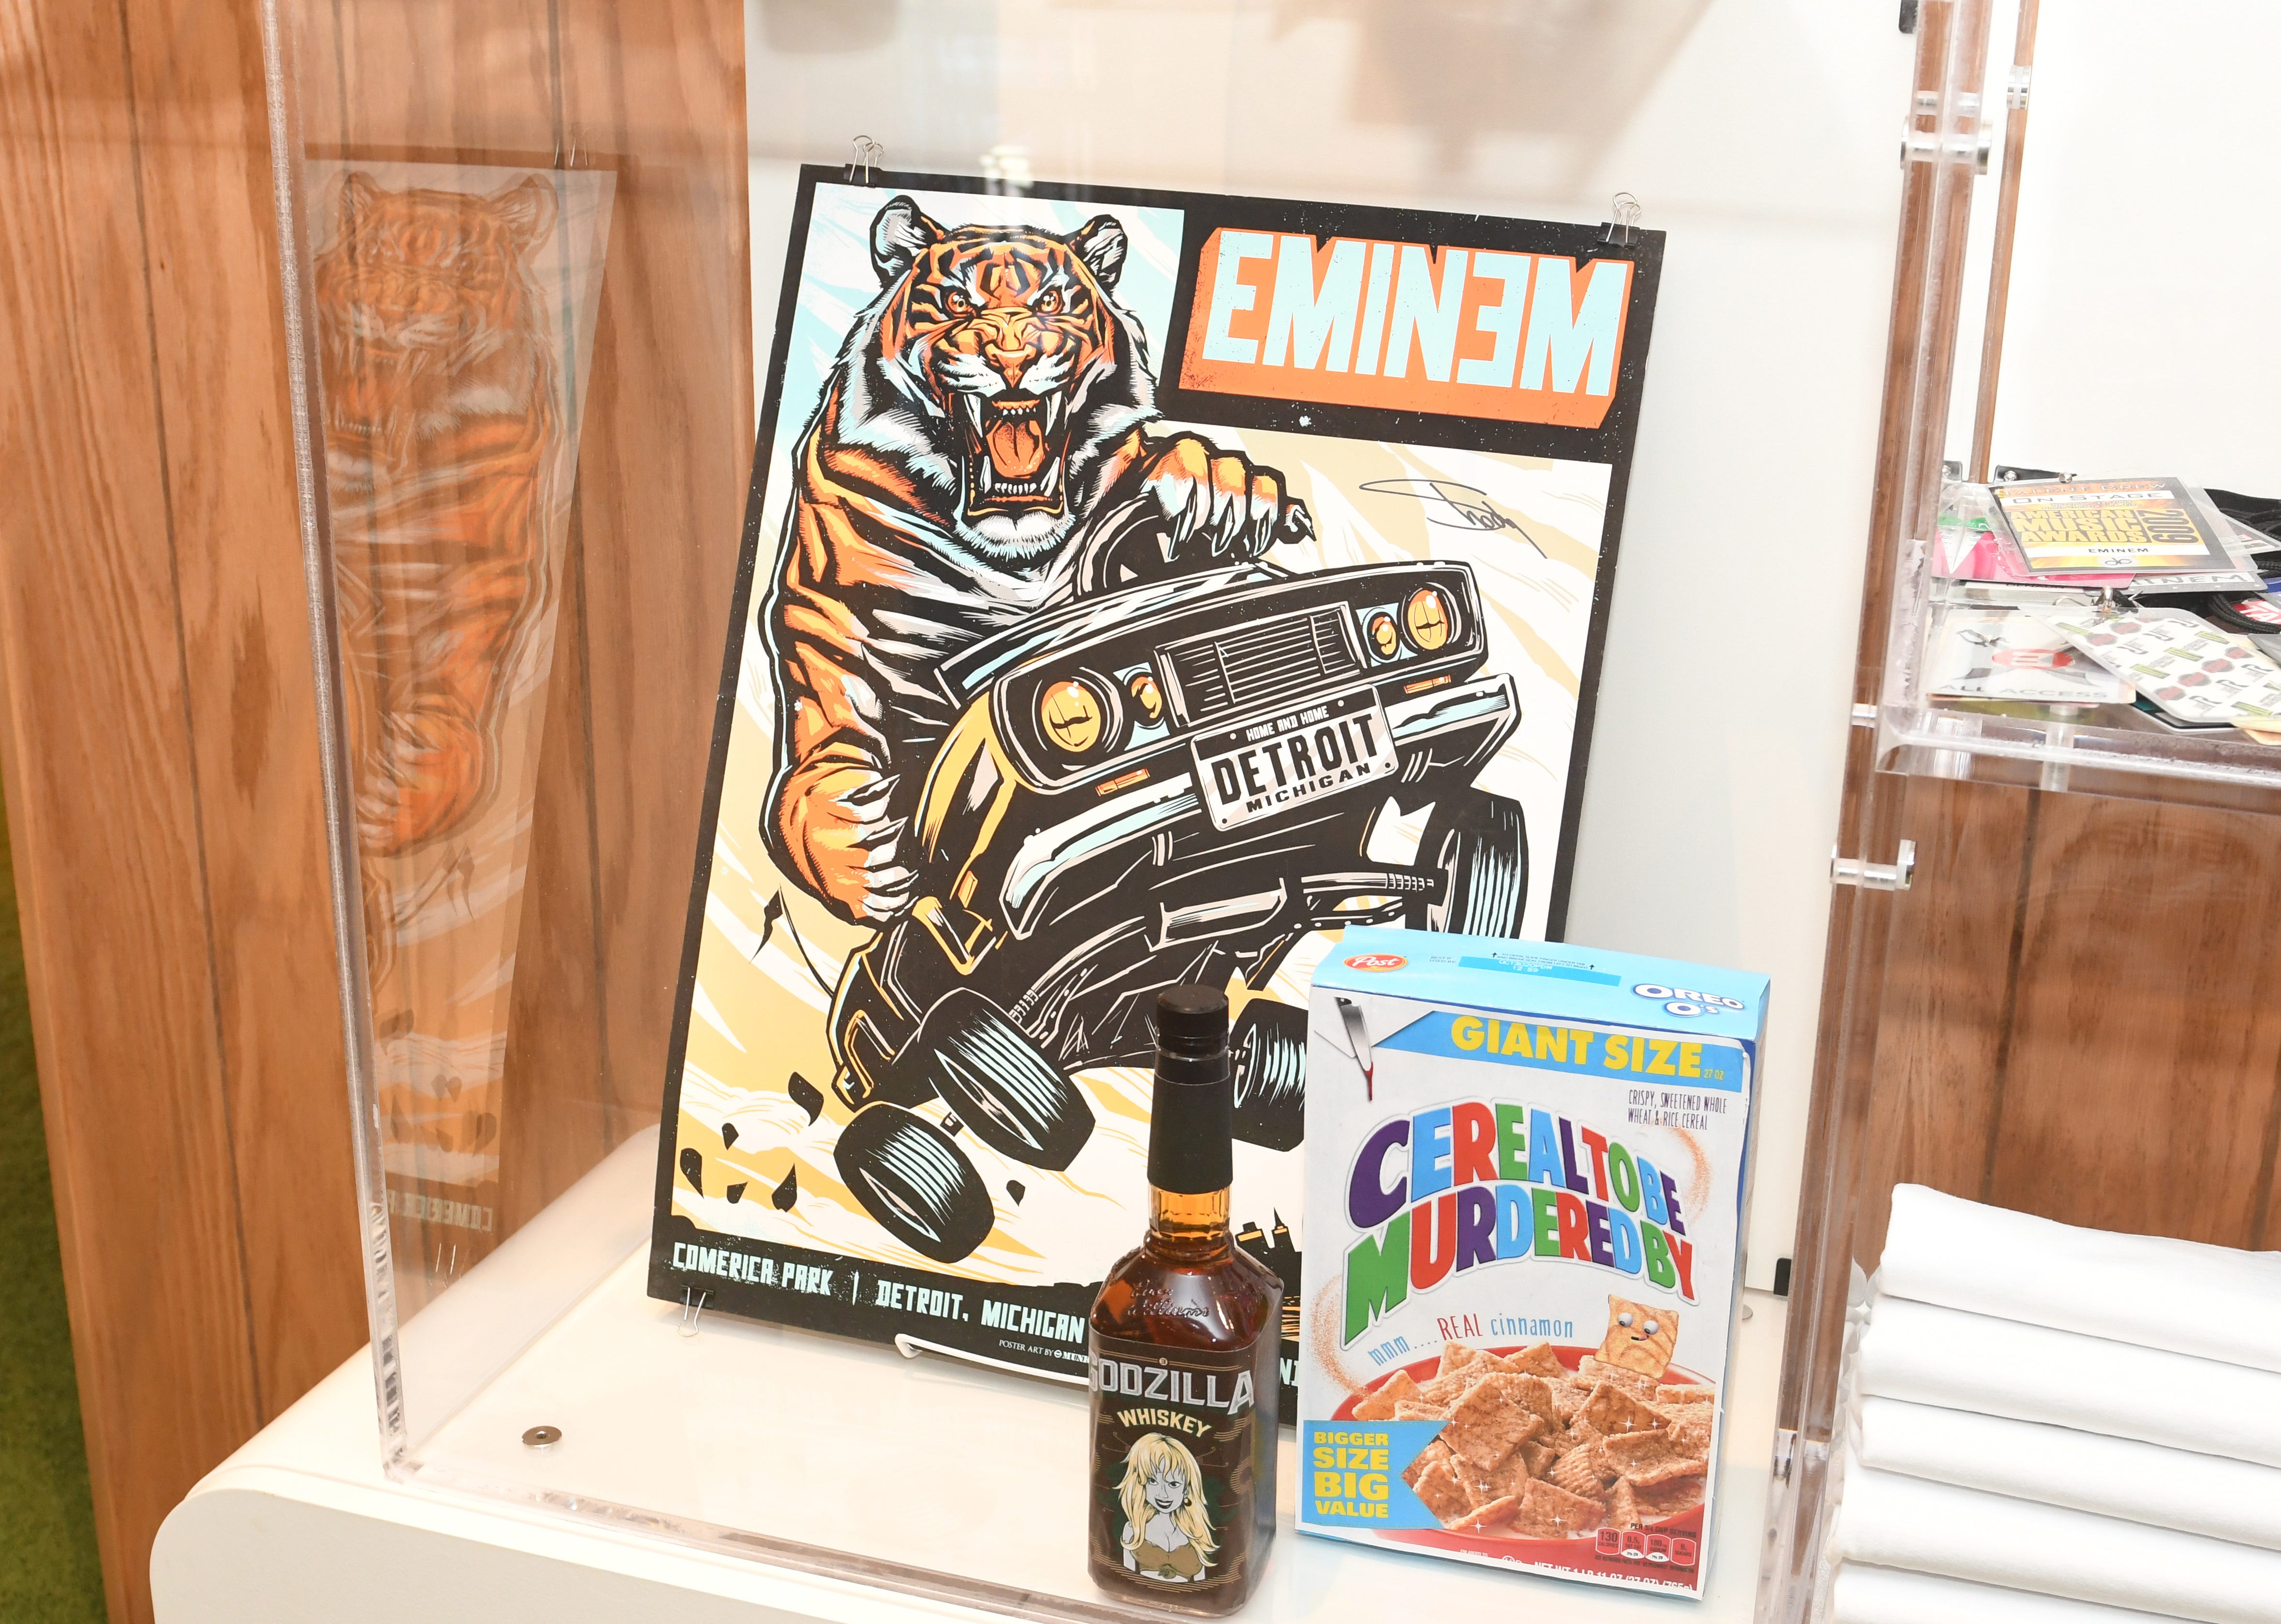 Memorabilia from Eminem is seen inside The Trailer retail shop at Mom's Spaghetti.